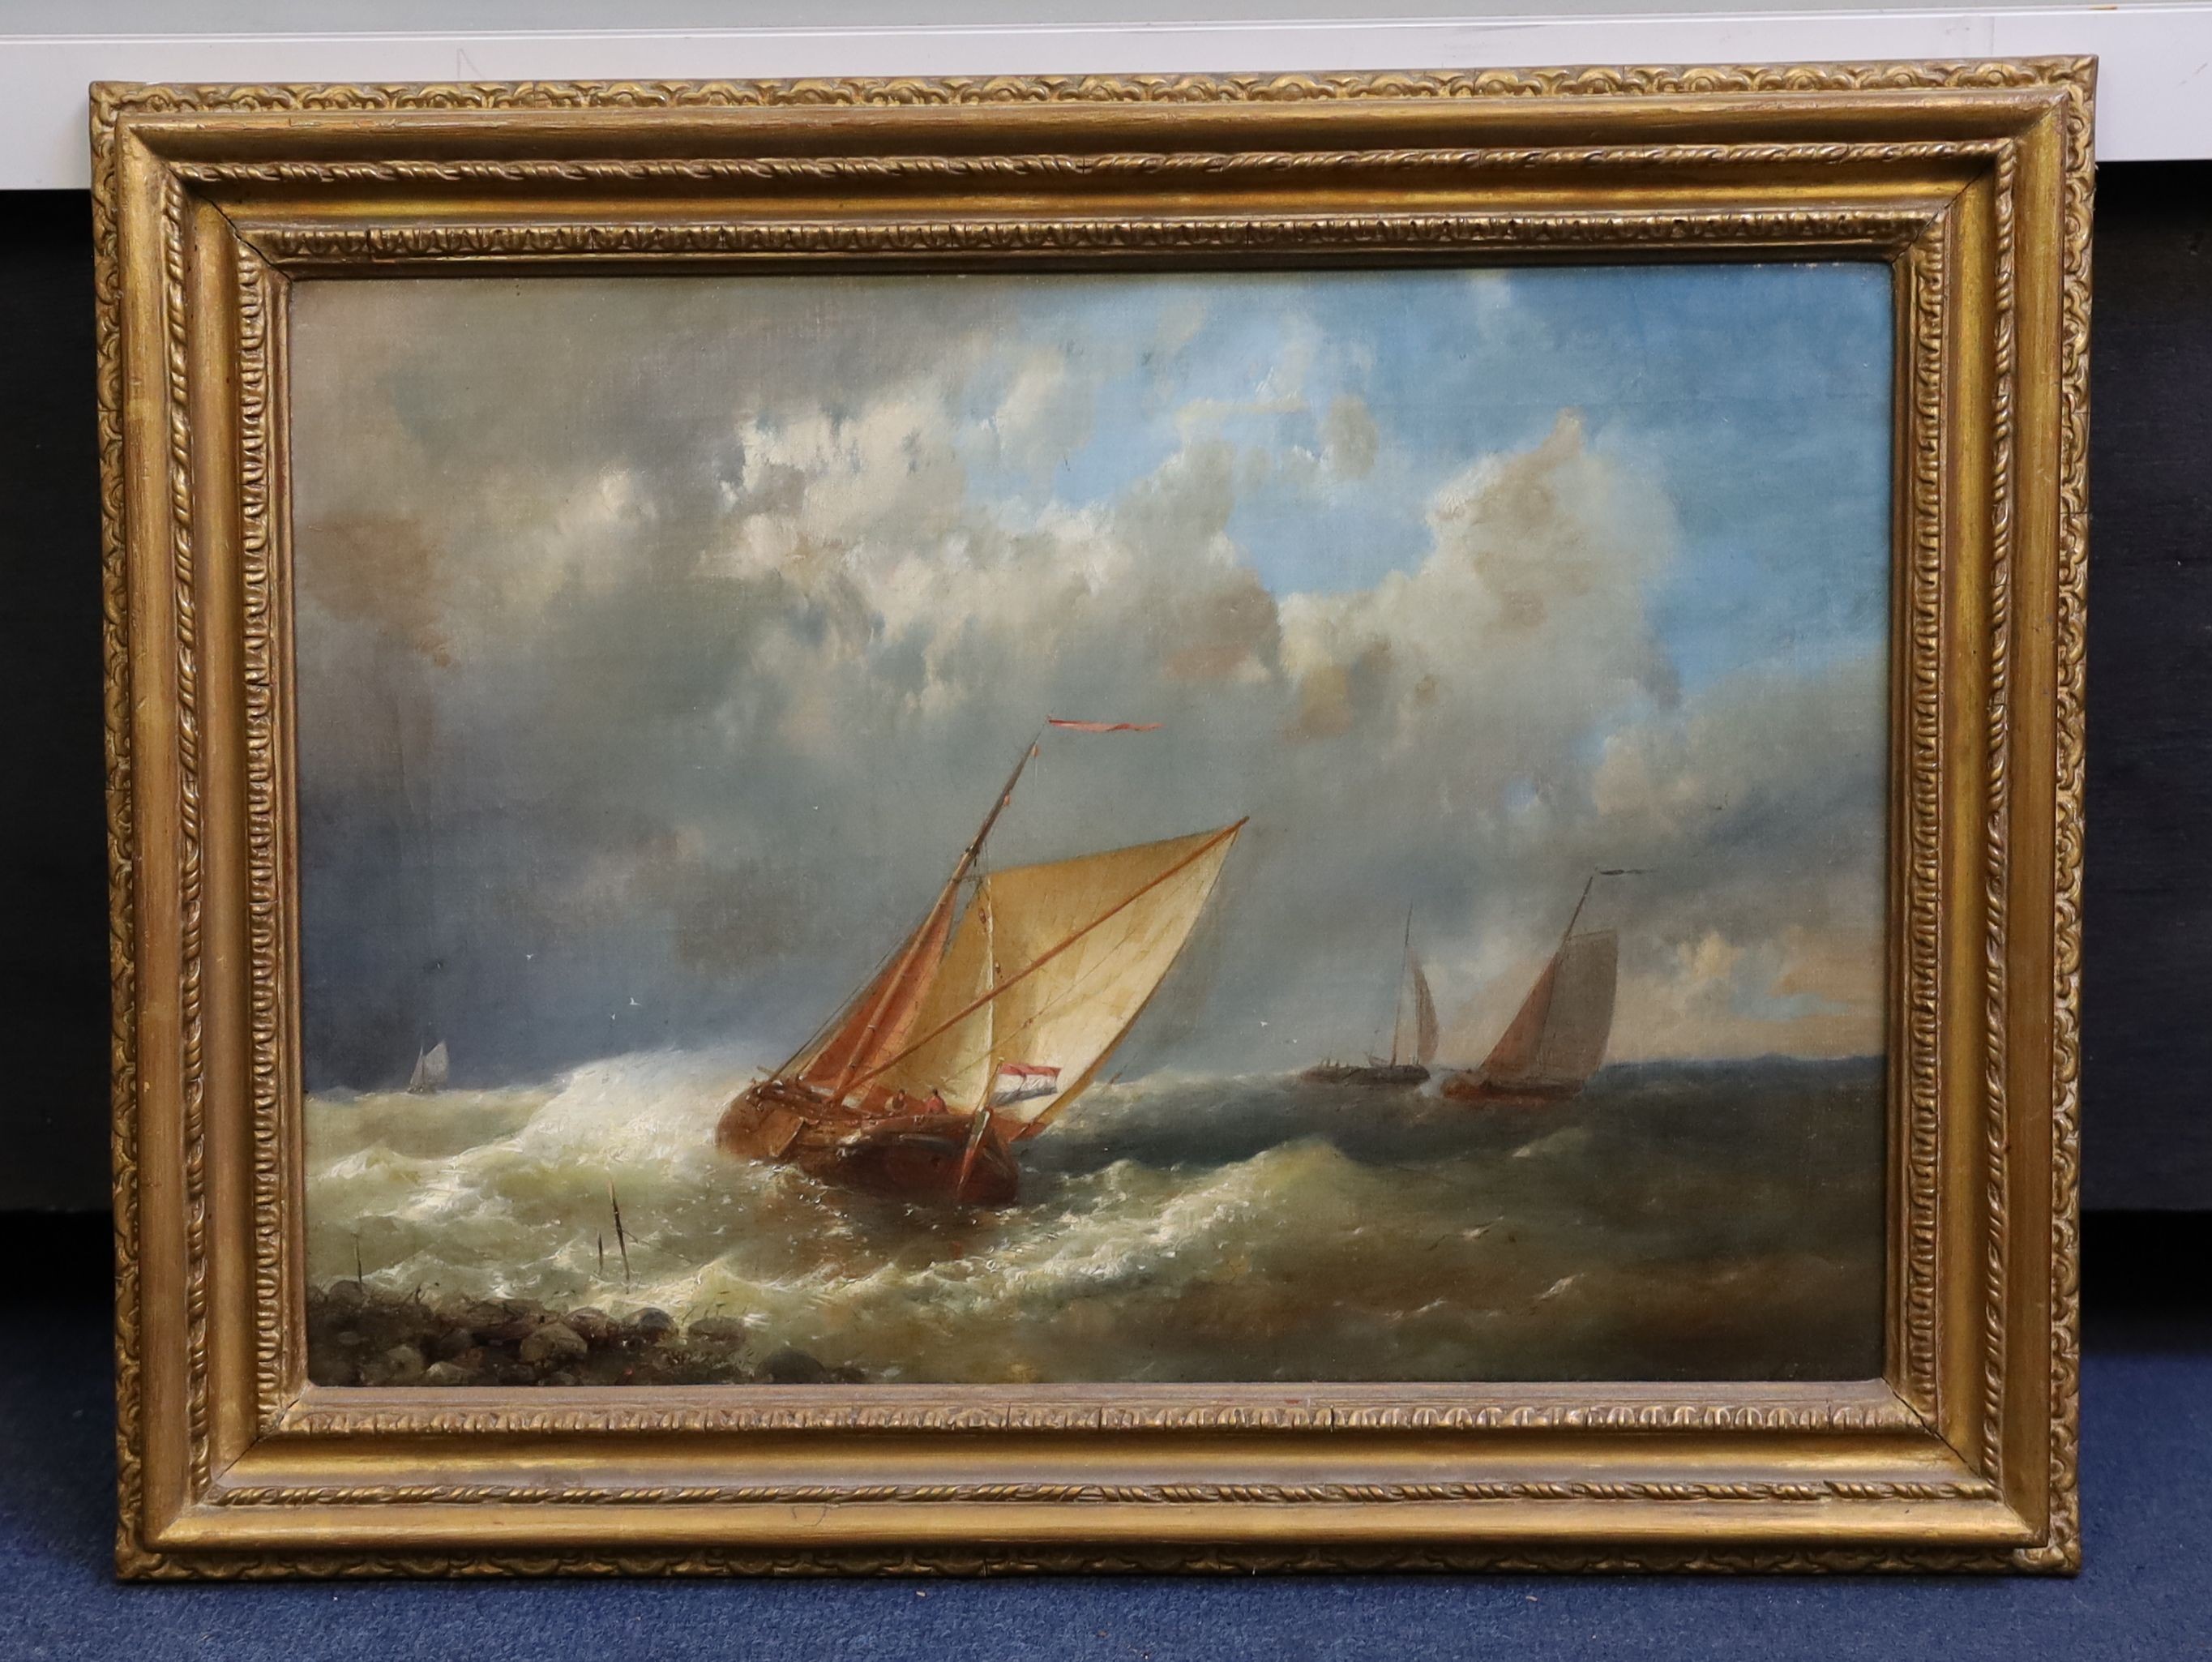 Abraham Hulk (Dutch, 1813-1897) Dutch vessels off the coastoil on canvassigned30 x 43cmOil on canvas - Image 2 of 3